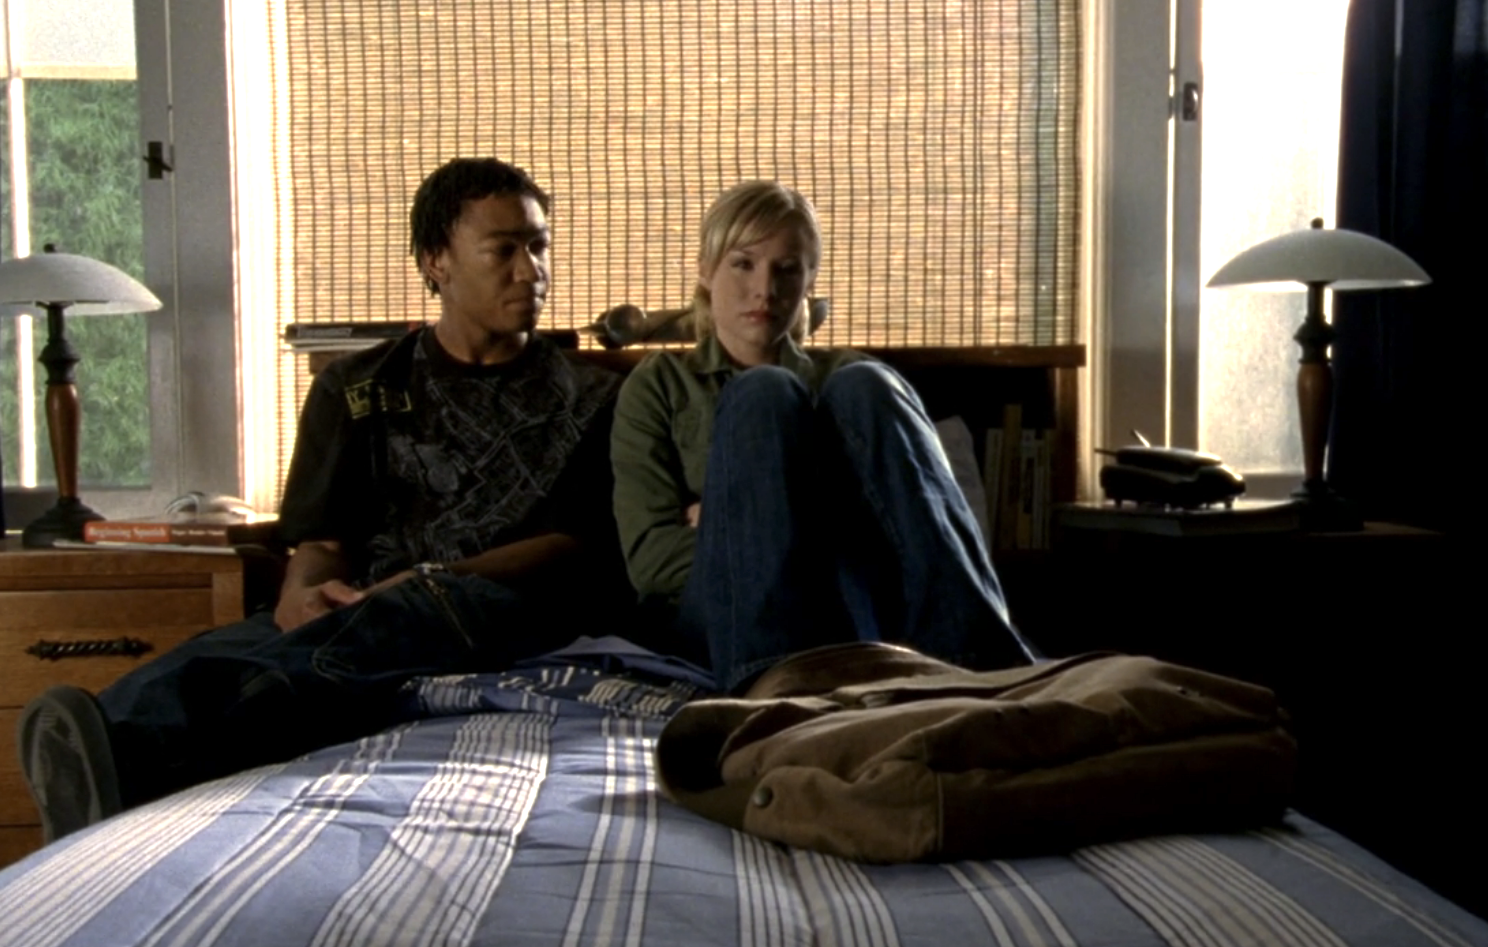 Screenshot from Veronica Mars S1E21. Wallace and Veronica are sitting on Wallace's bed sharing what looks like a sad moment.